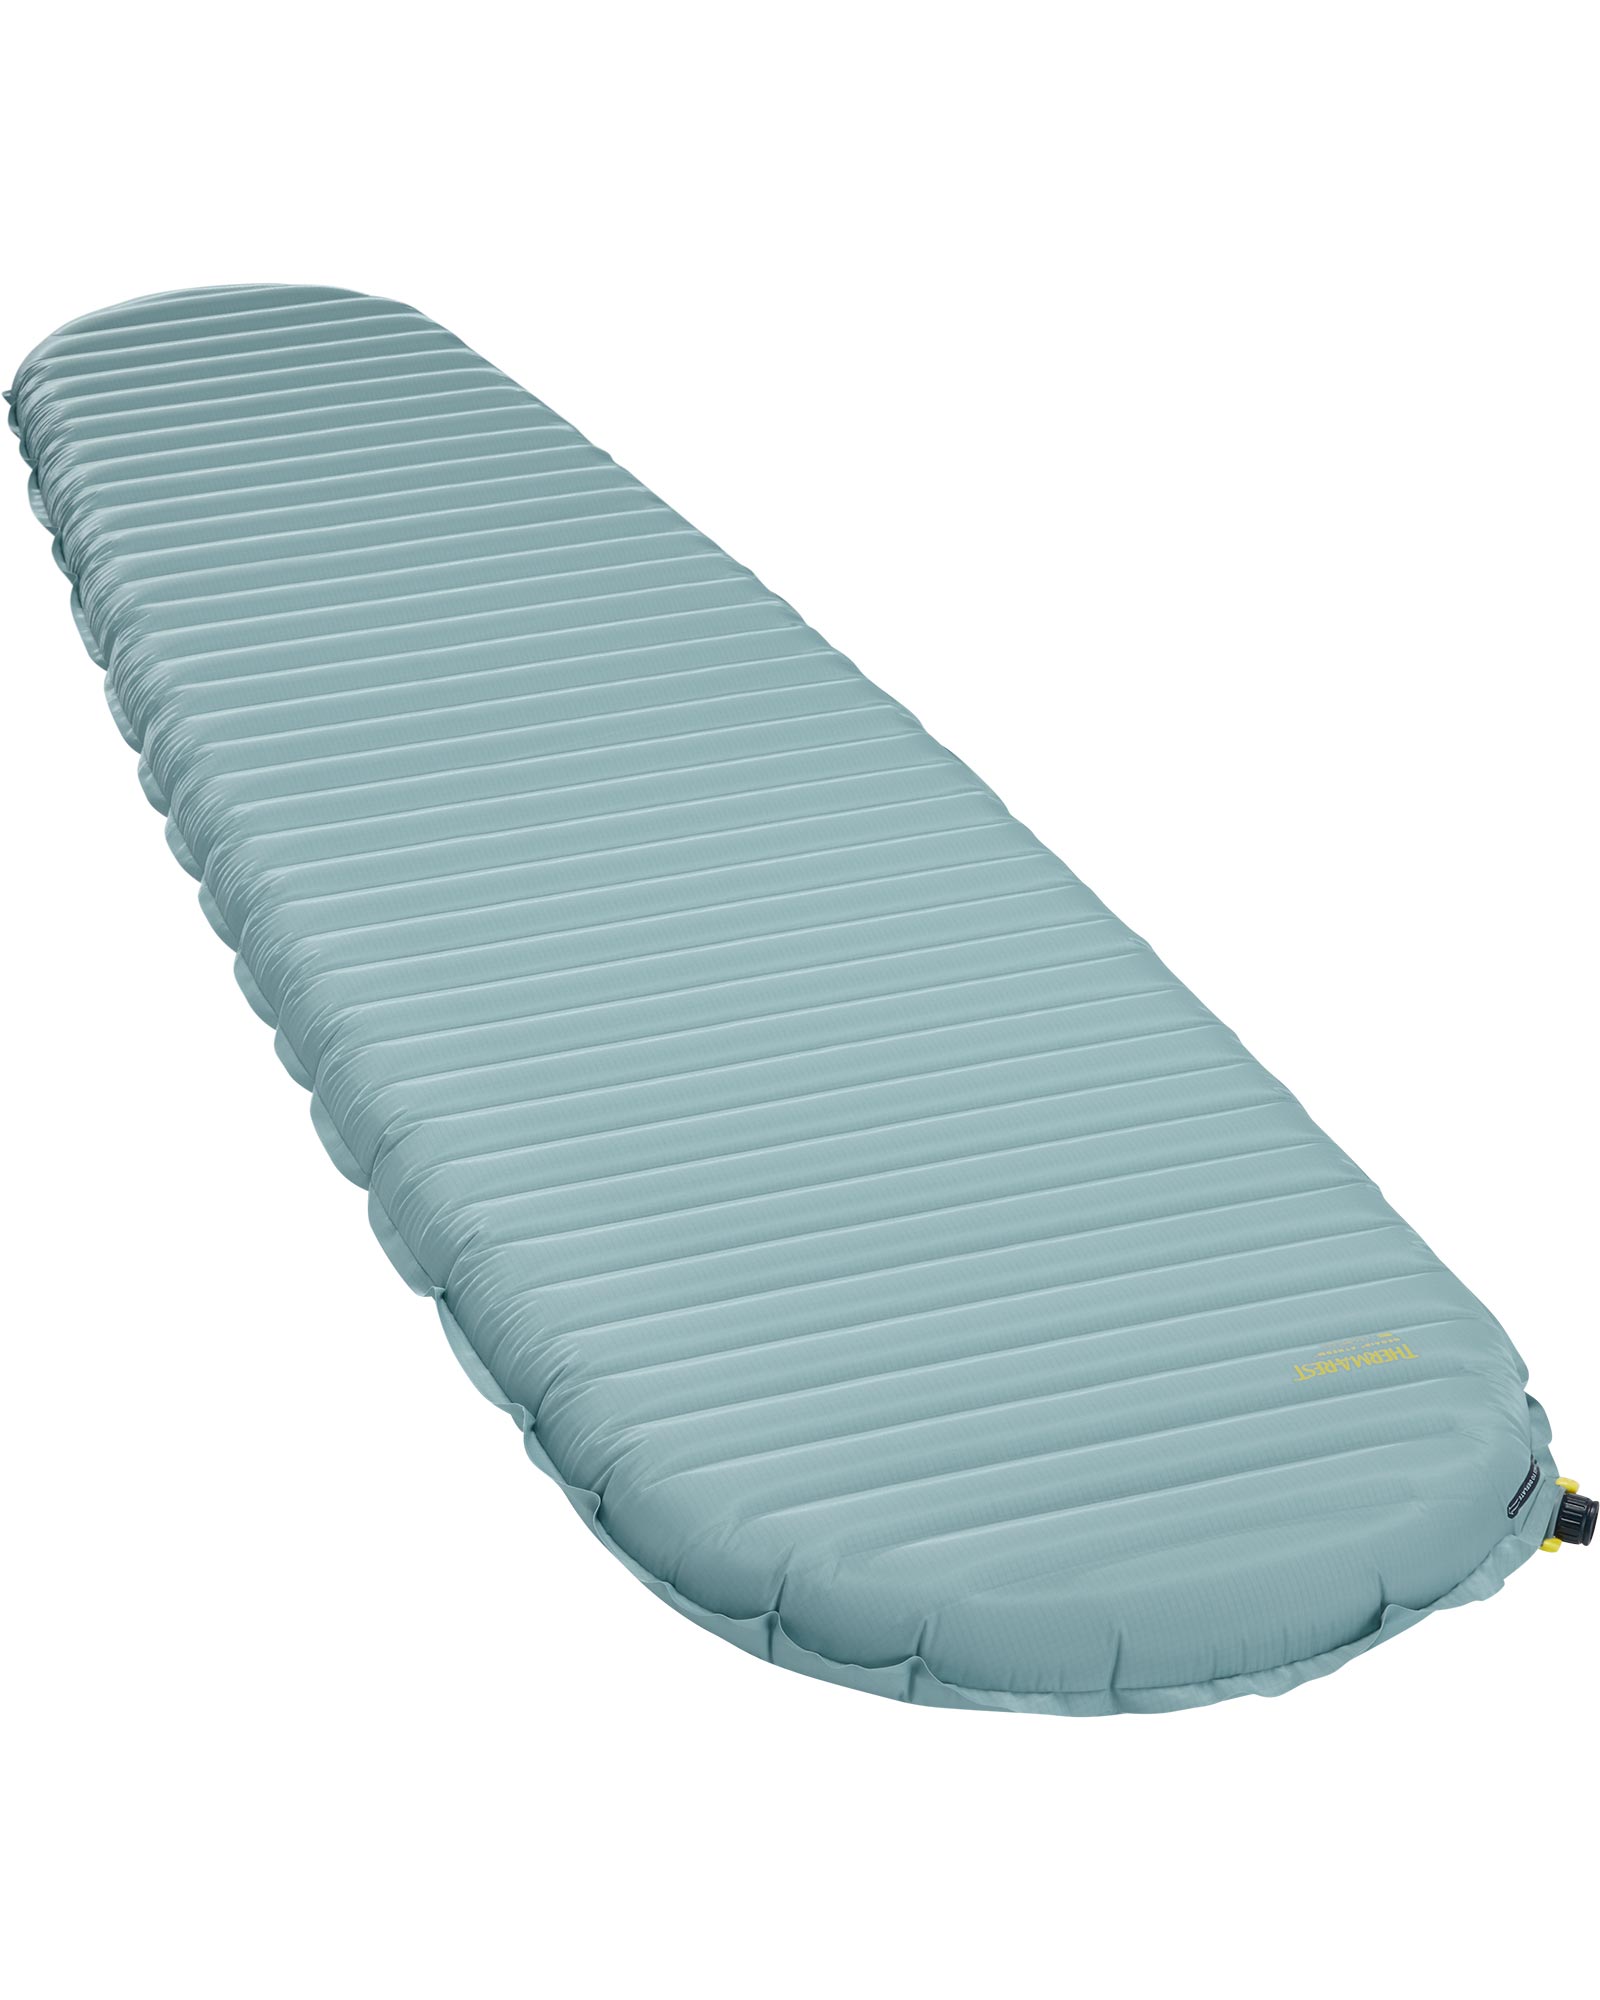 Therm-a-rest Neoair Xtherm Nxt R